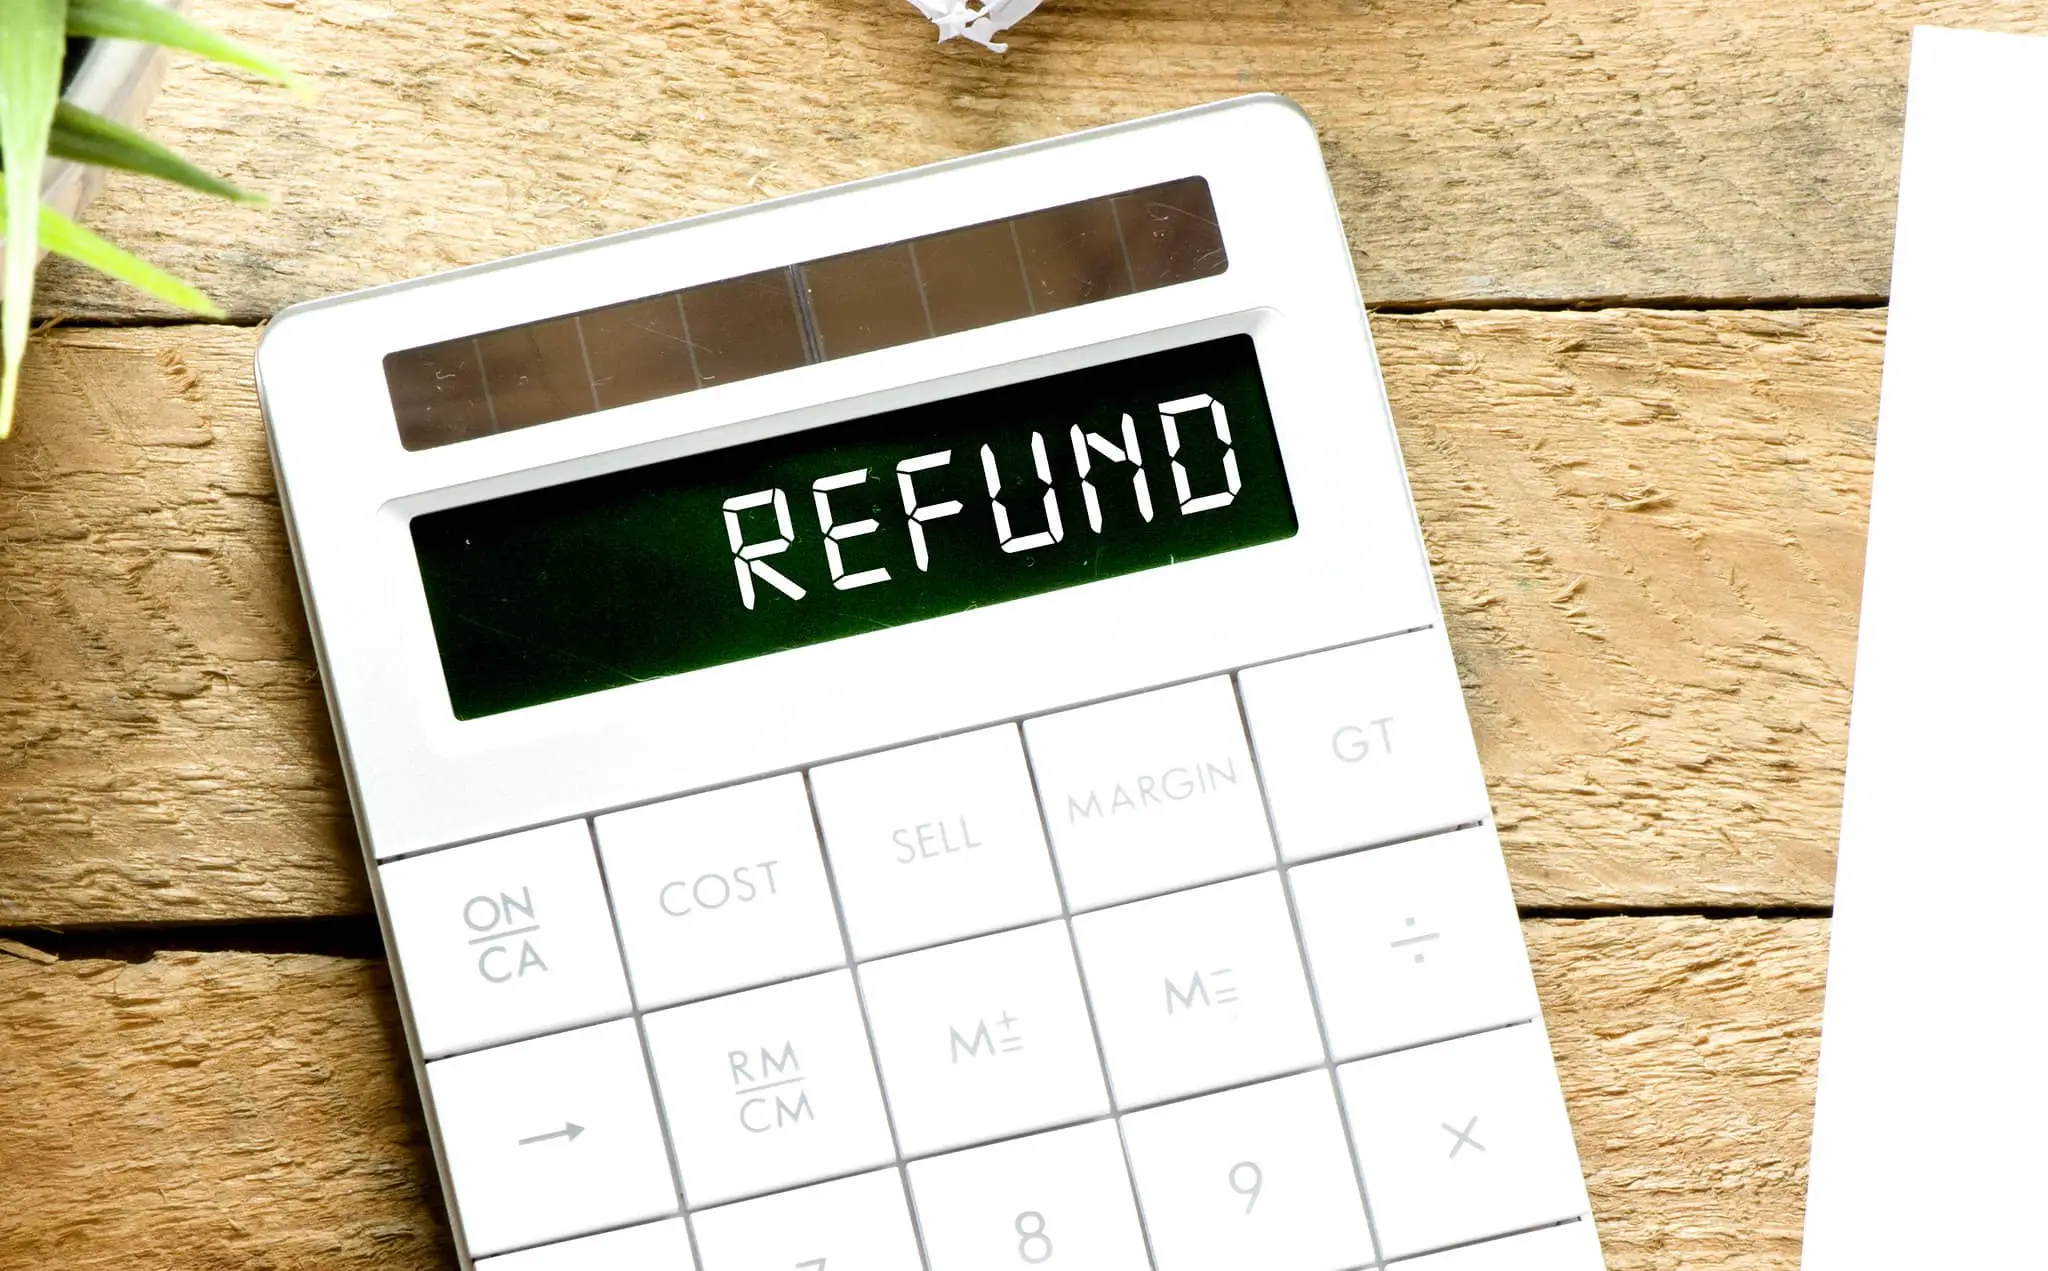 refund spelled out on calculator placed on desk with plant next to it